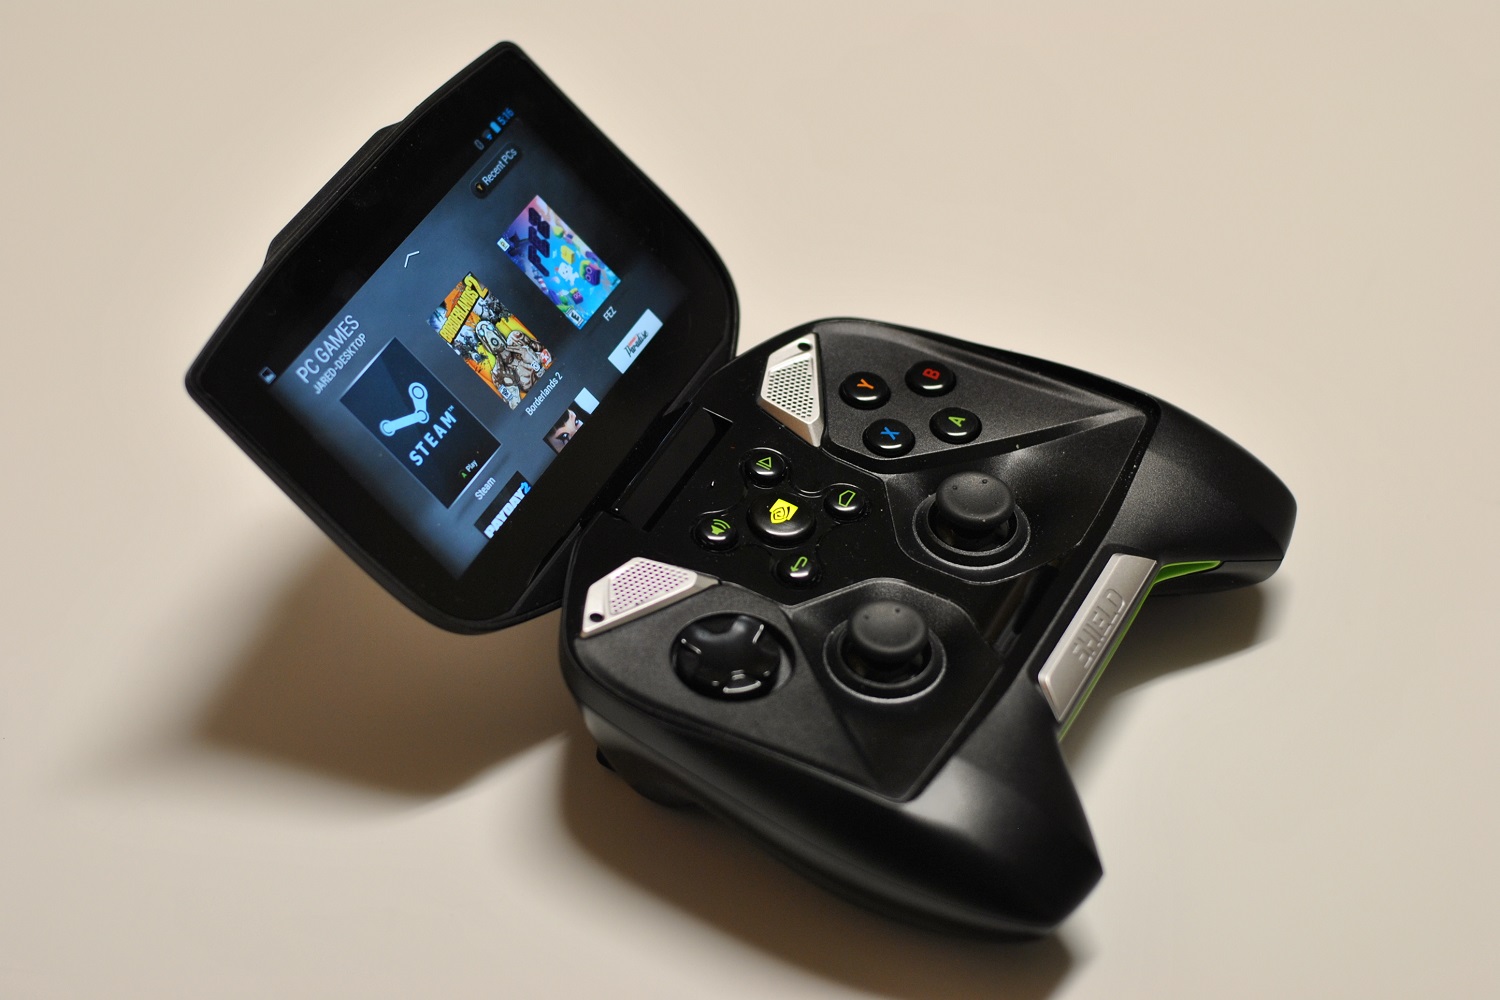 connect nvidia shield controller to pc